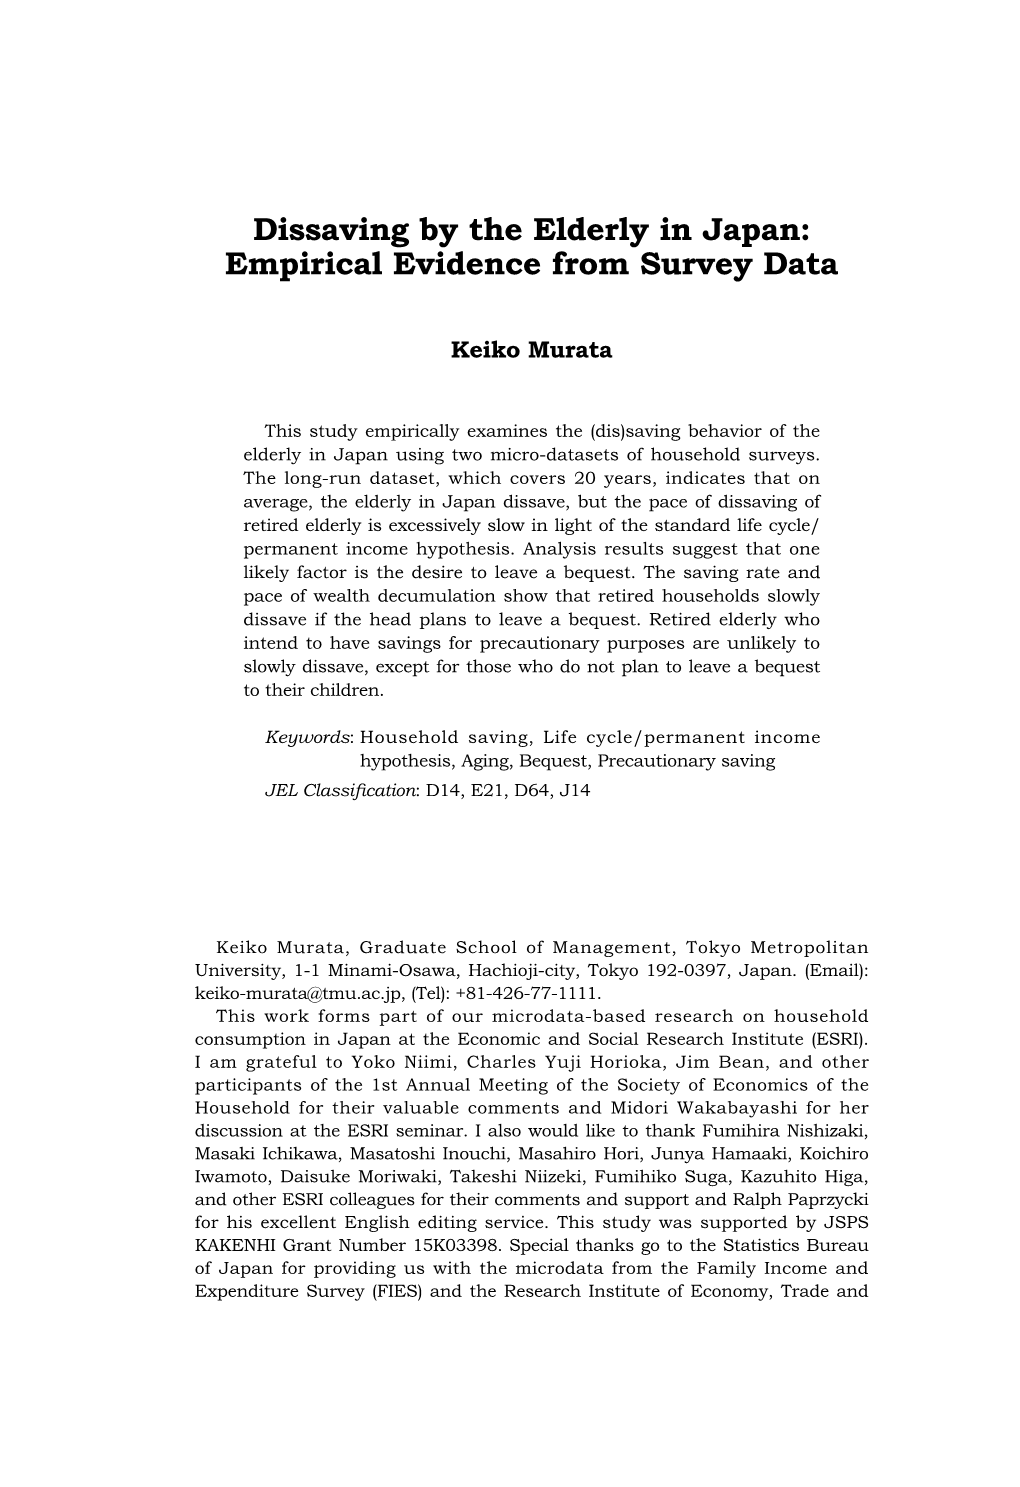 Dissaving by the Elderly in Japan: Empirical Evidence from Survey Data